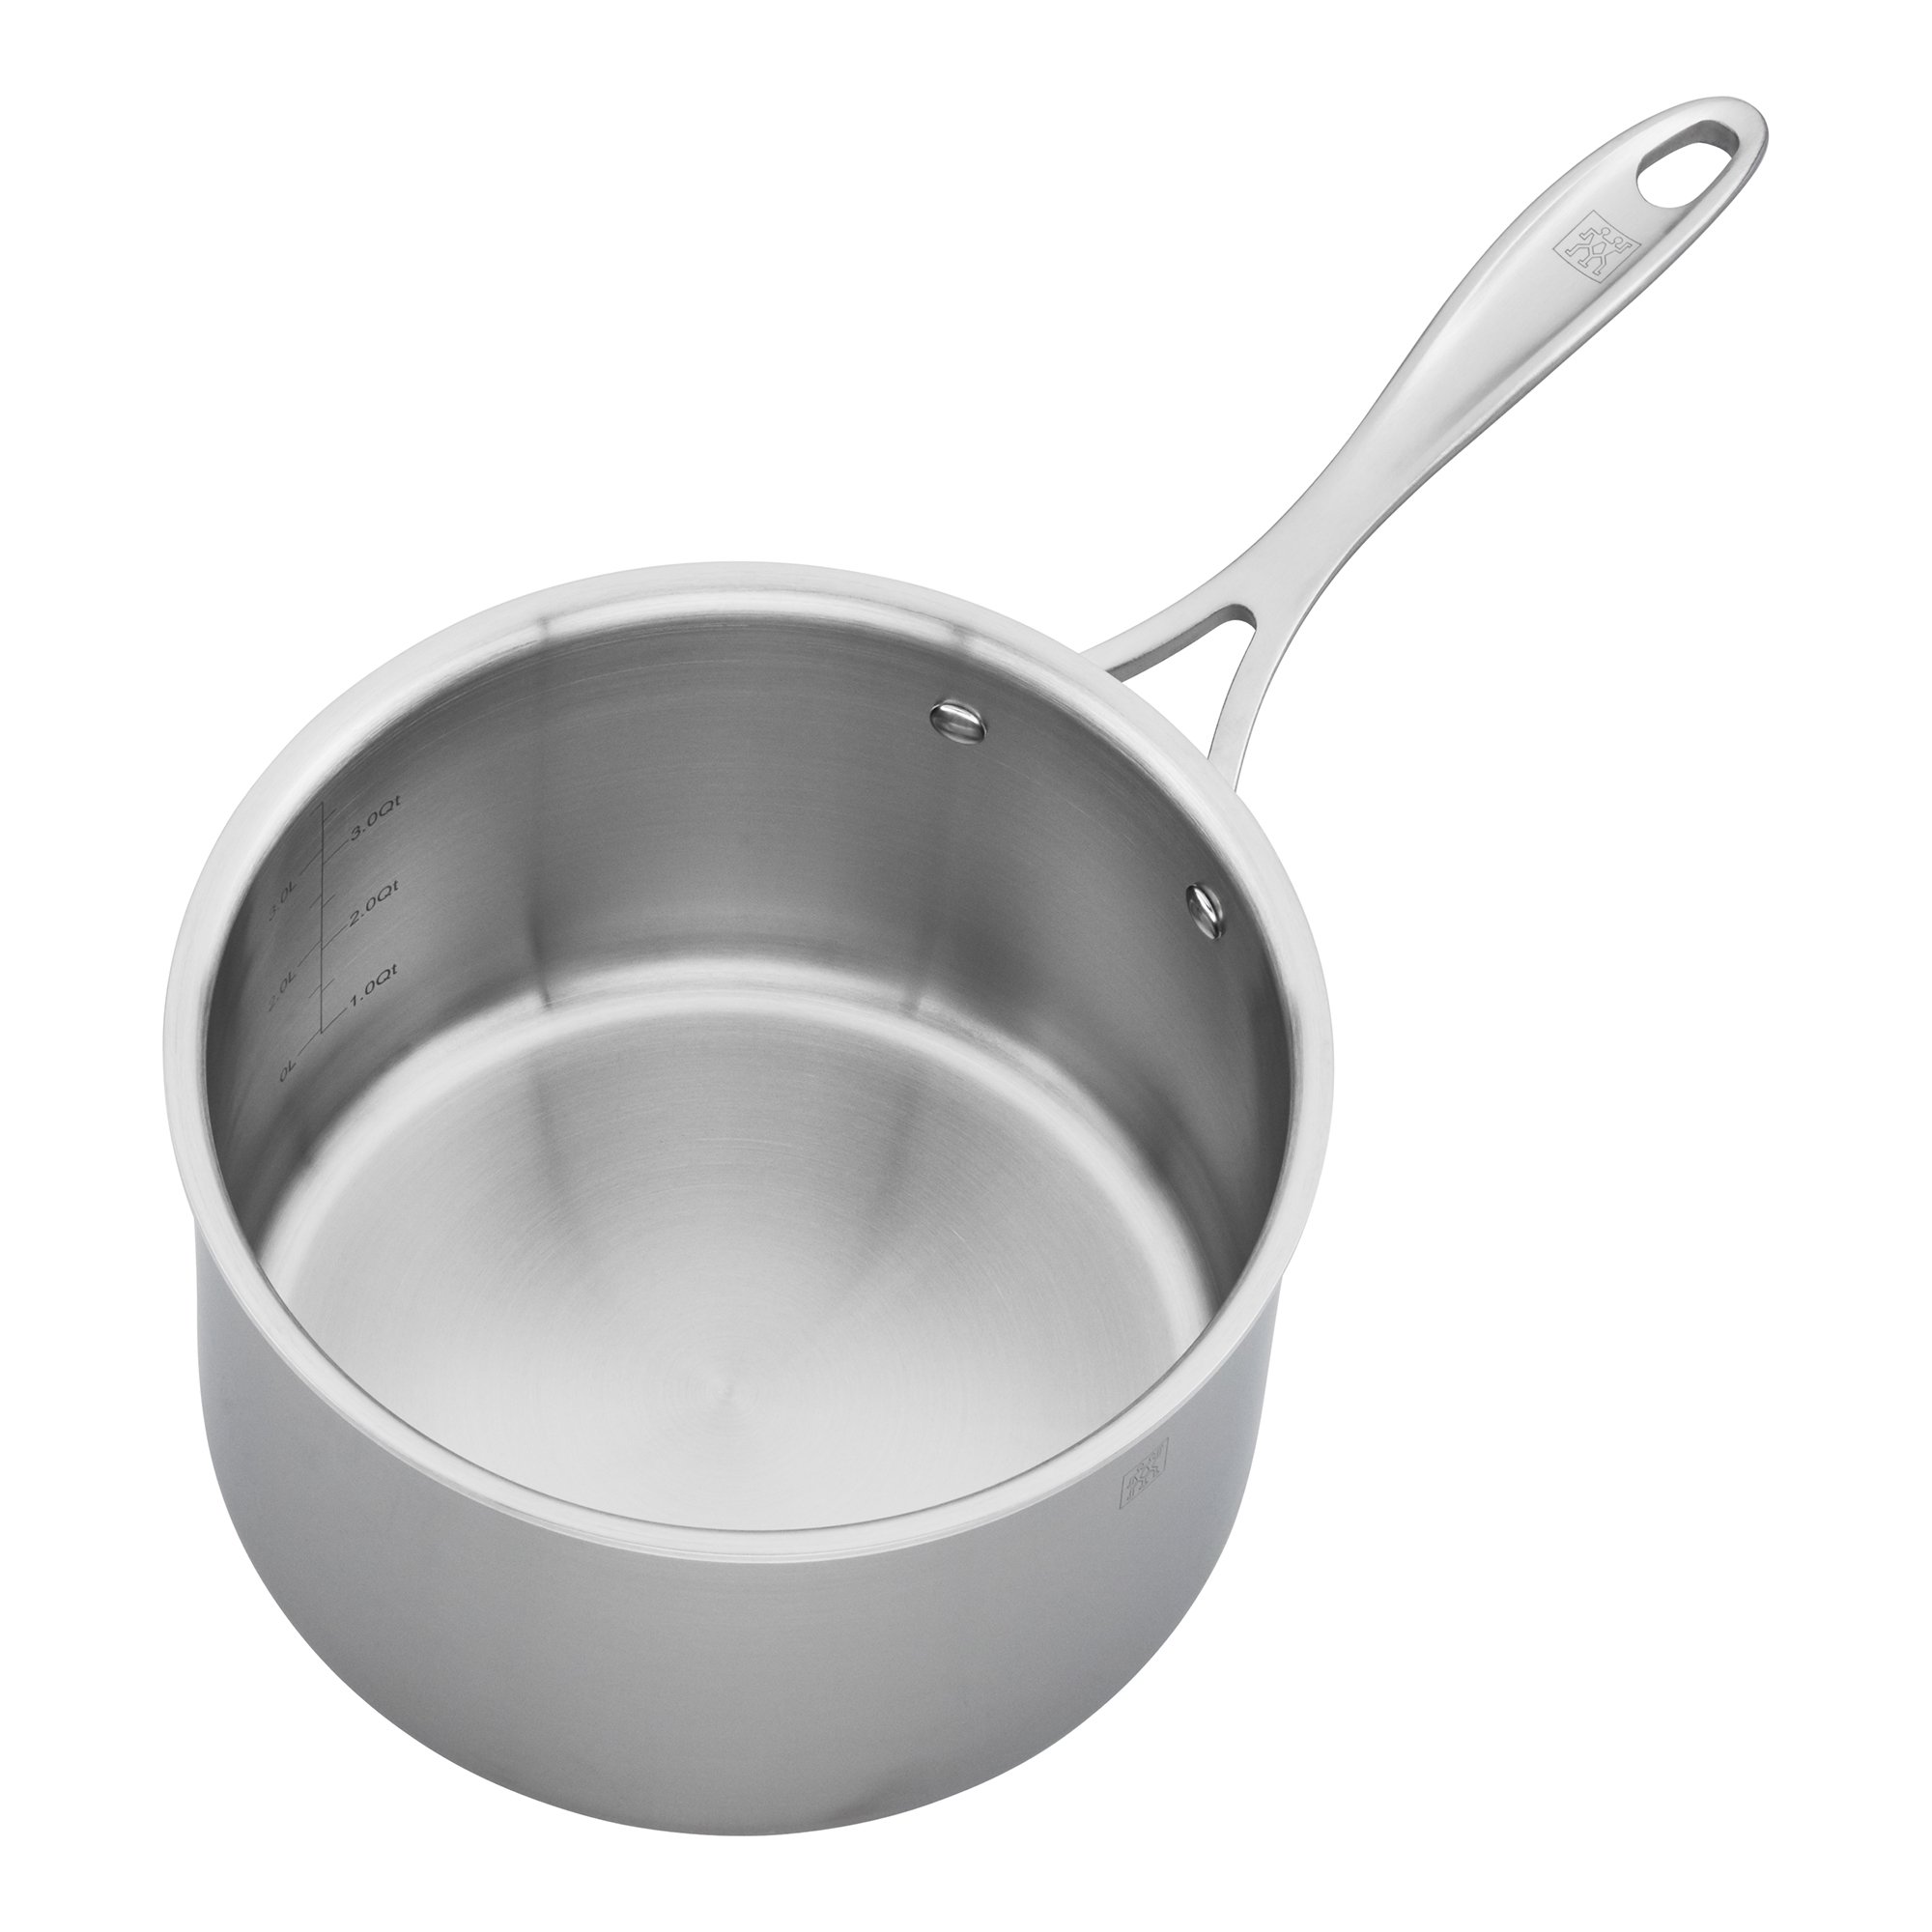 ZWILLING Spirit 3-ply 4-qt Stainless Steel Saucepan